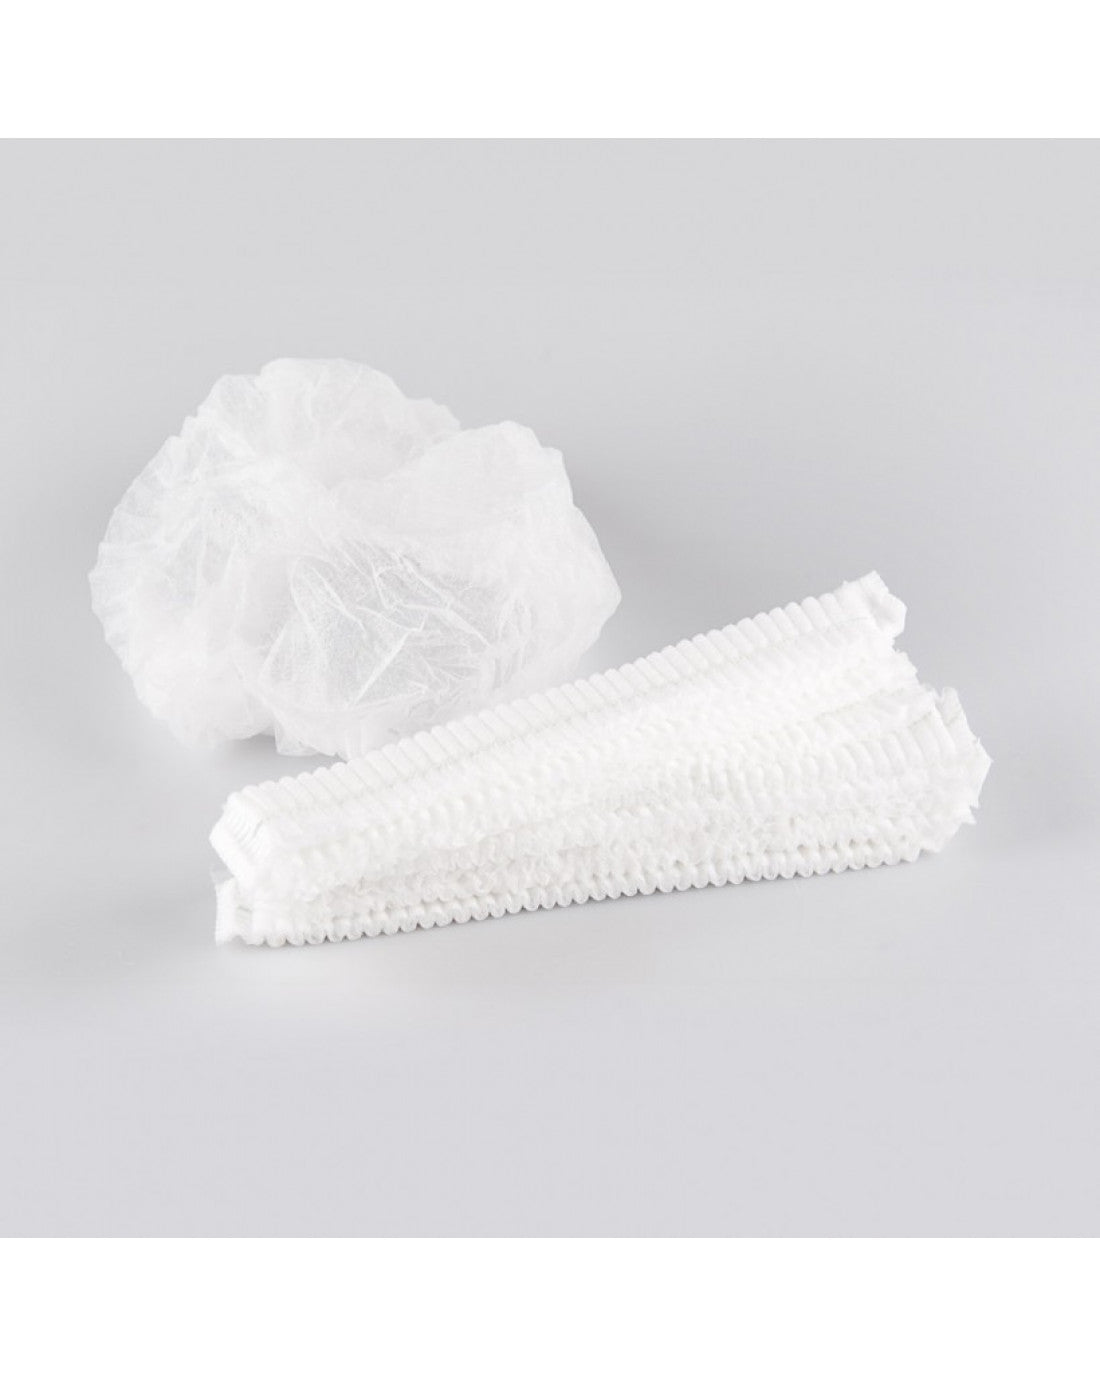 White, corrugated, disposable hats made of non-woven material 100 pcs. / Pleated disposable nonwoven cap